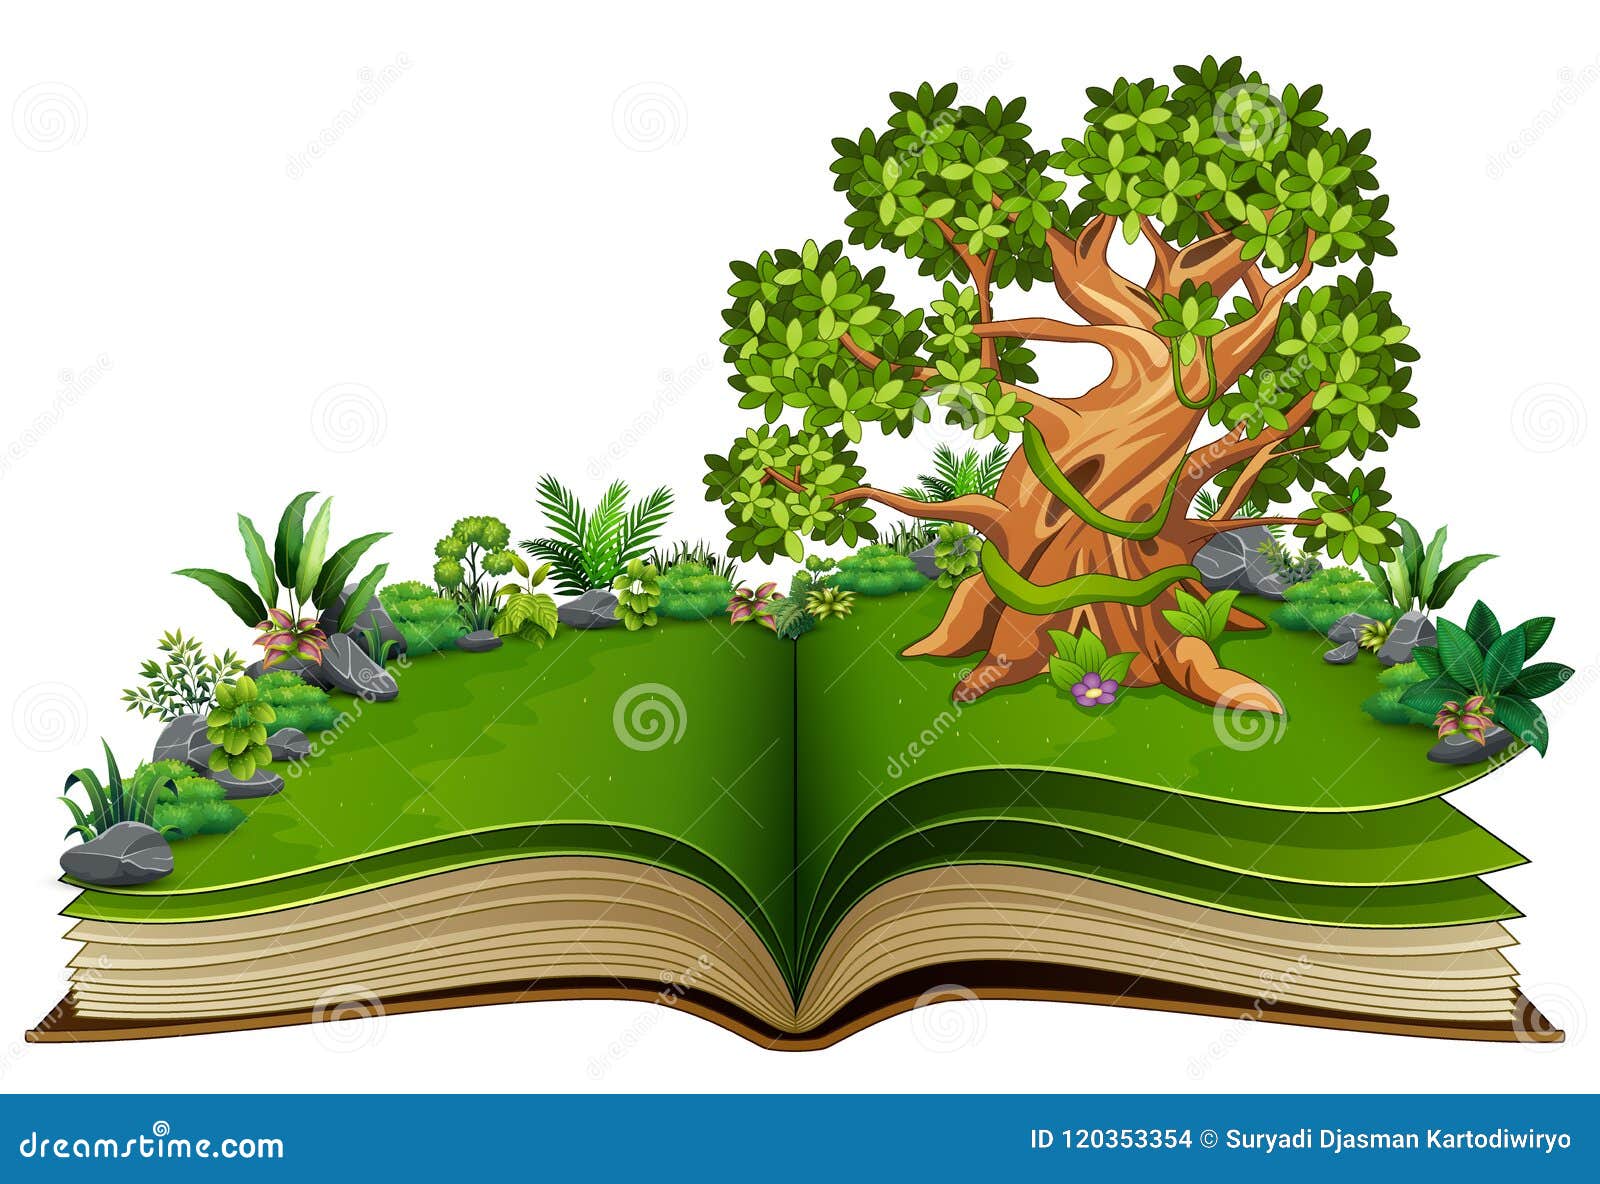 open book with animals cartoon on the trees